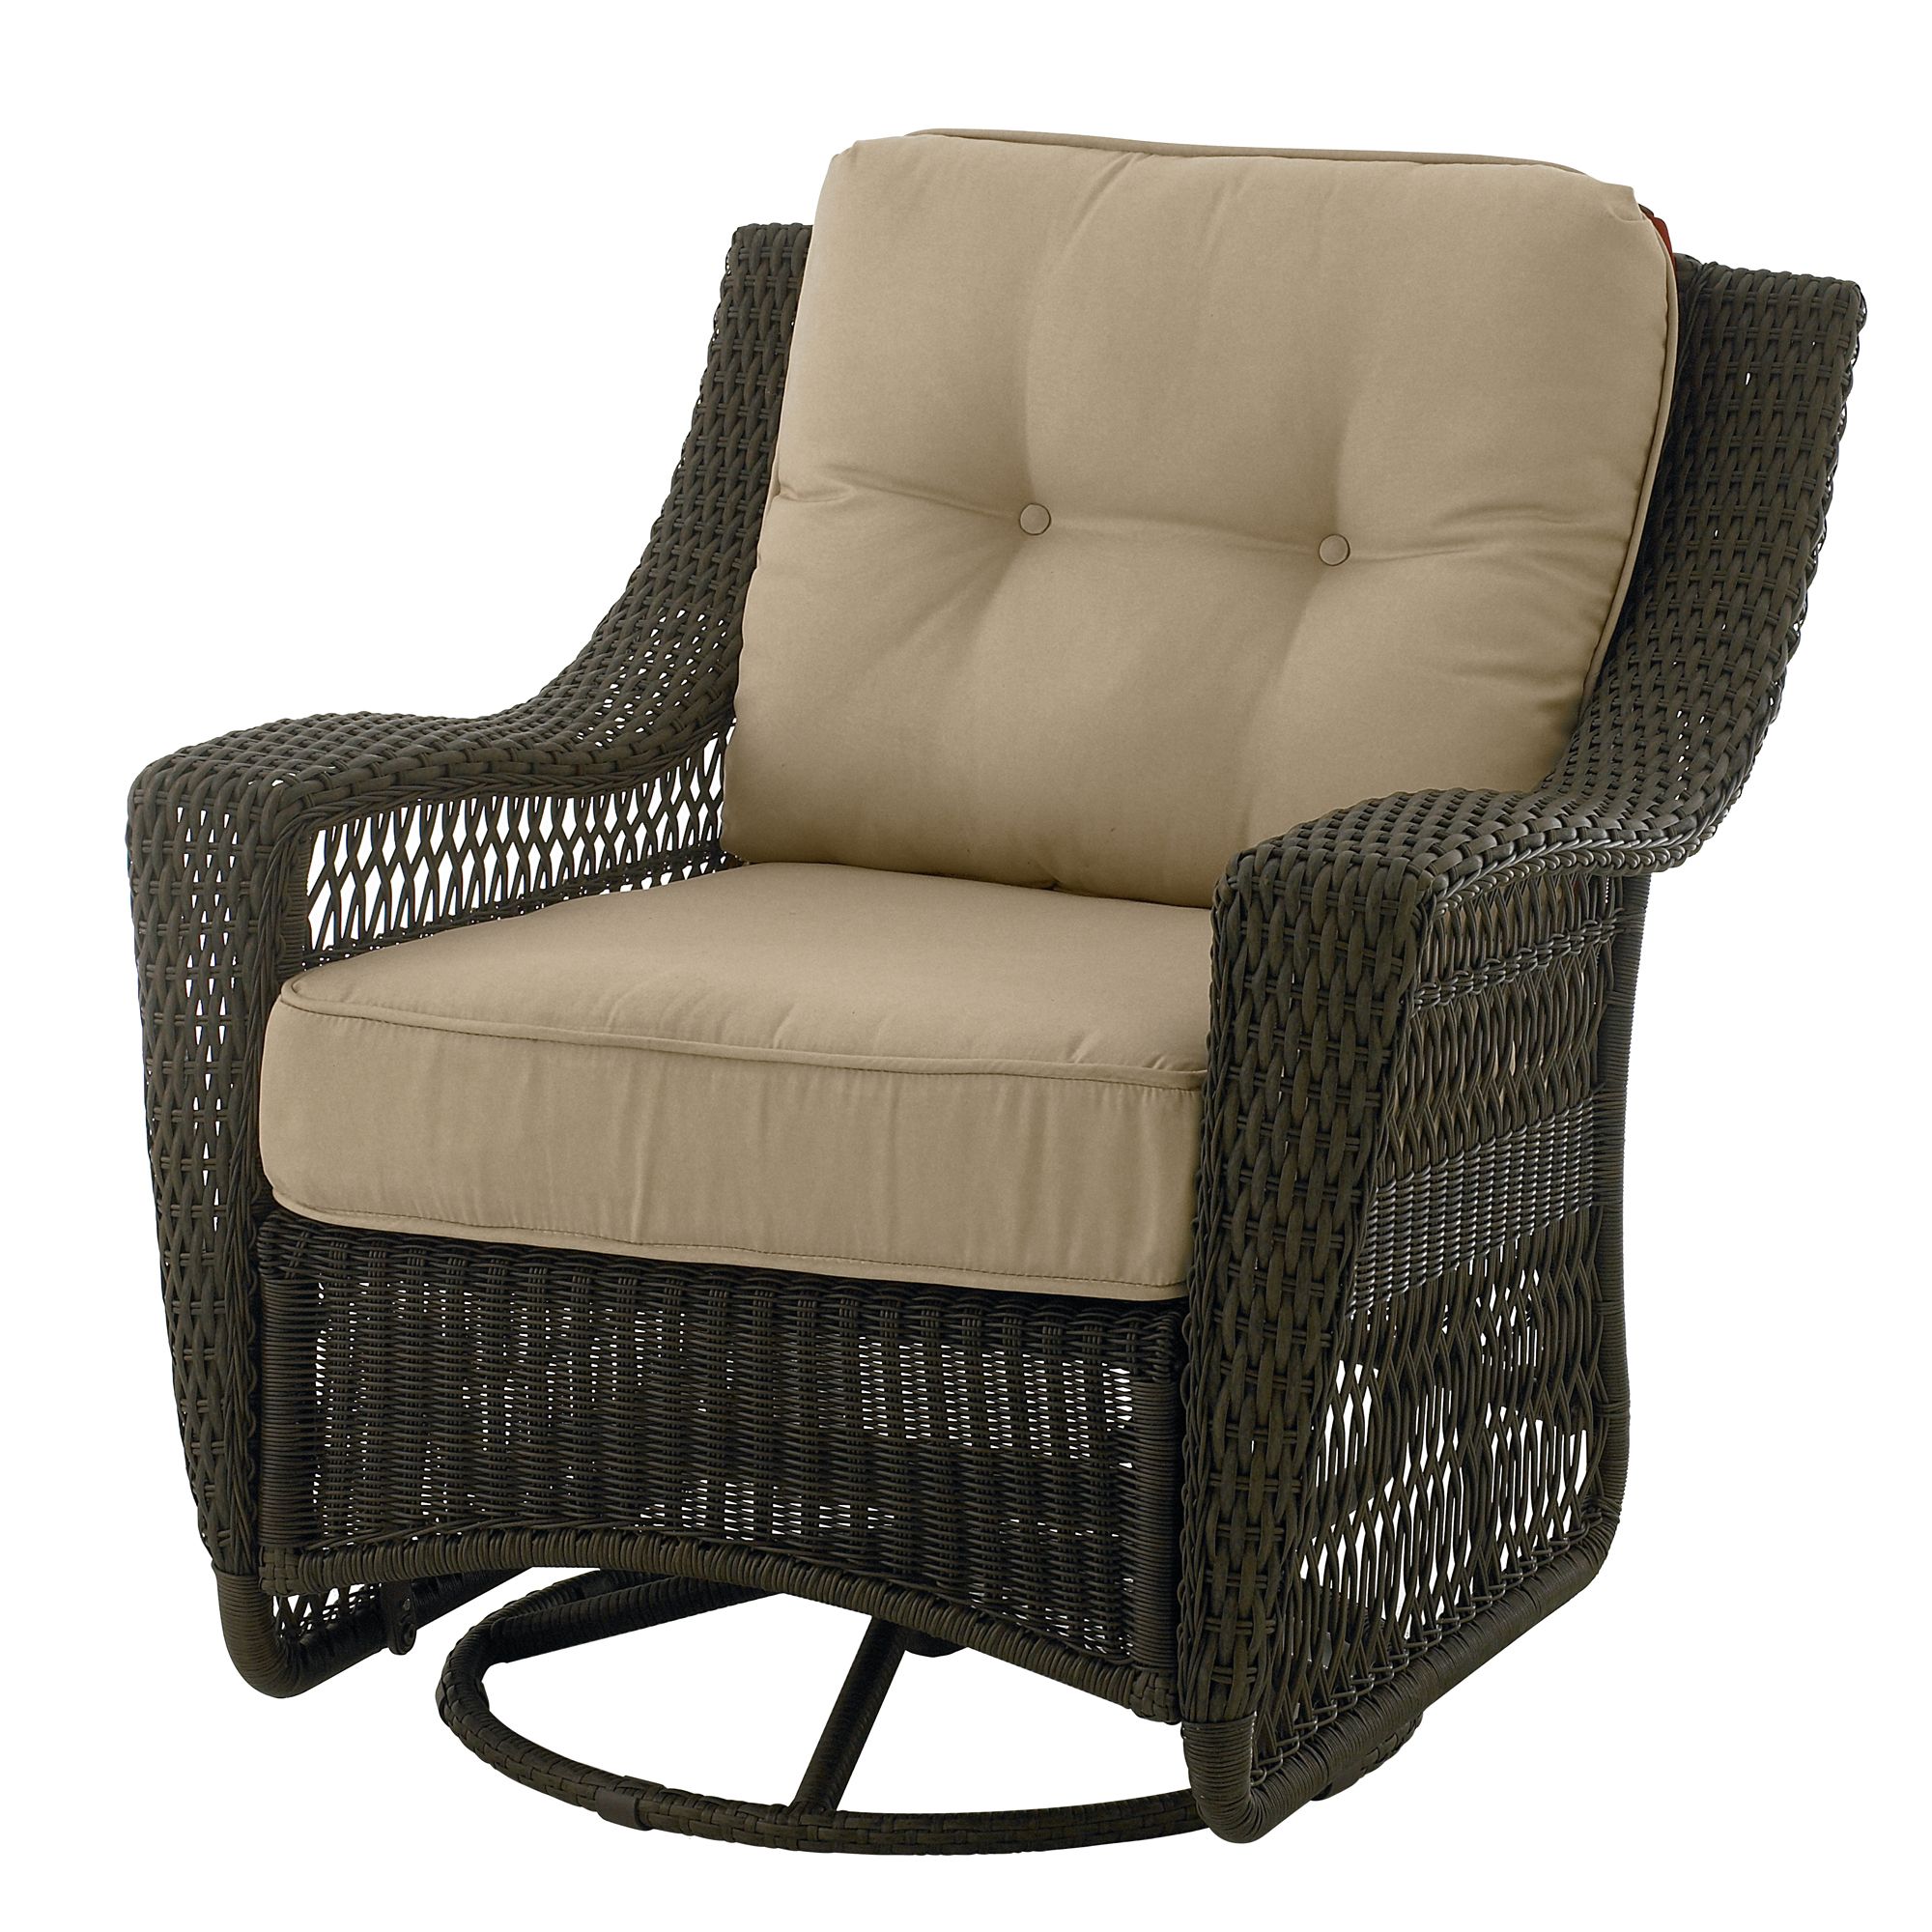 Stunning Country Living Concord Swivel Glider Patio Chair swivel glider patio chairs